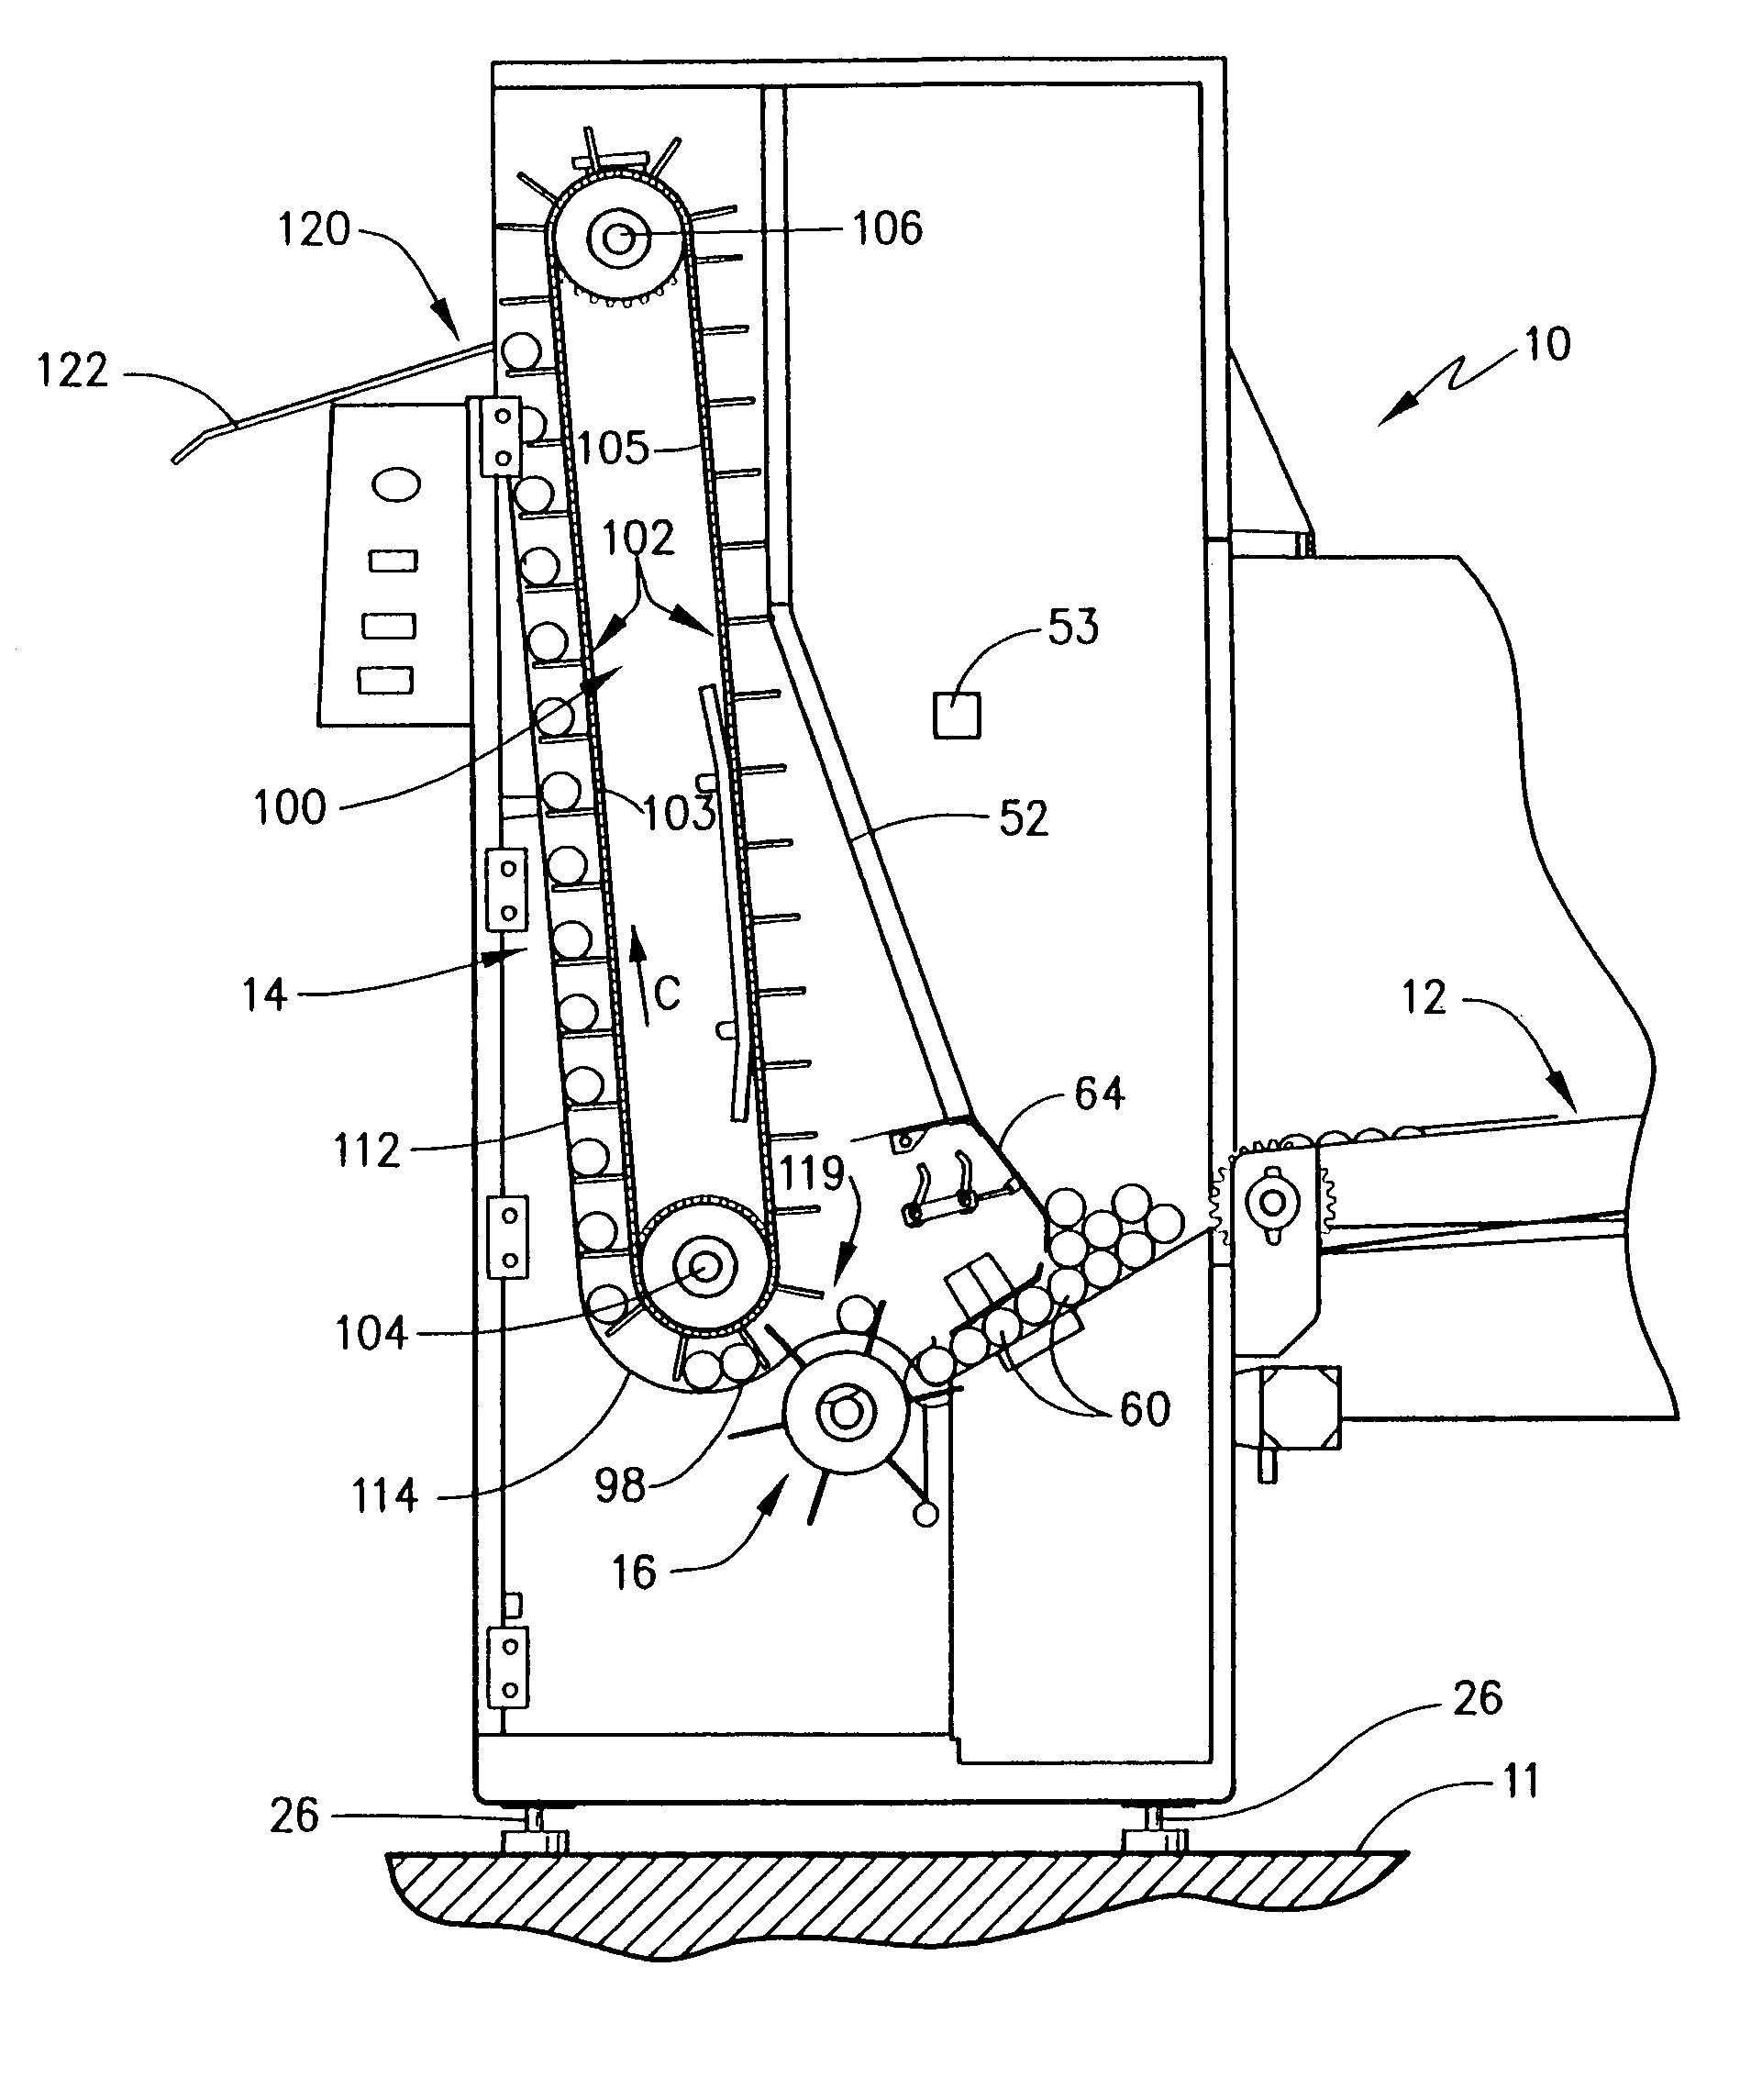 Container transport and organizing apparatus for use in manufacturing operations and method thereof